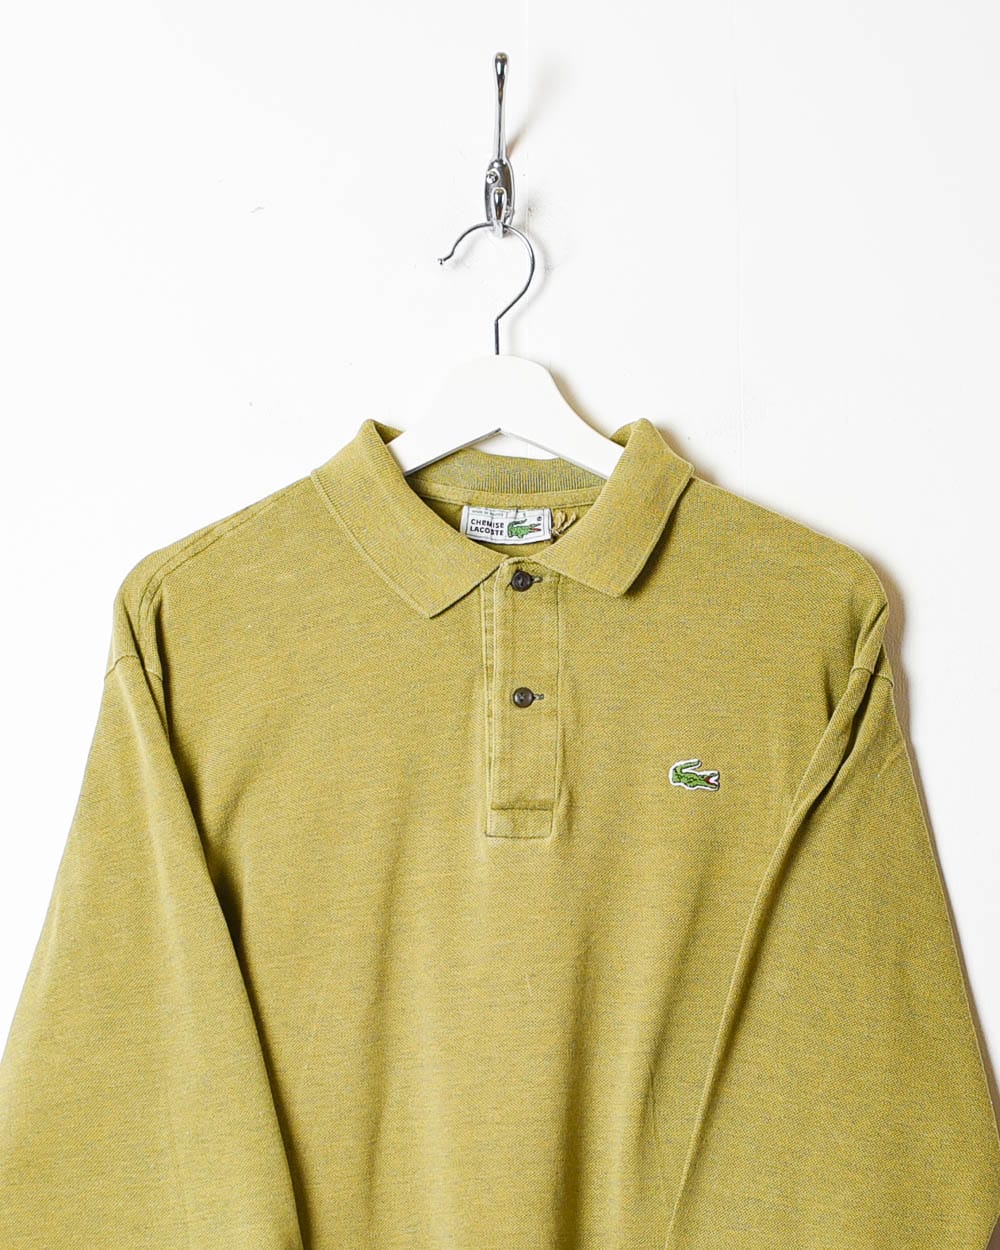 Neutral Chemise Lacoste Long Sleeved Polo Shirt - Large